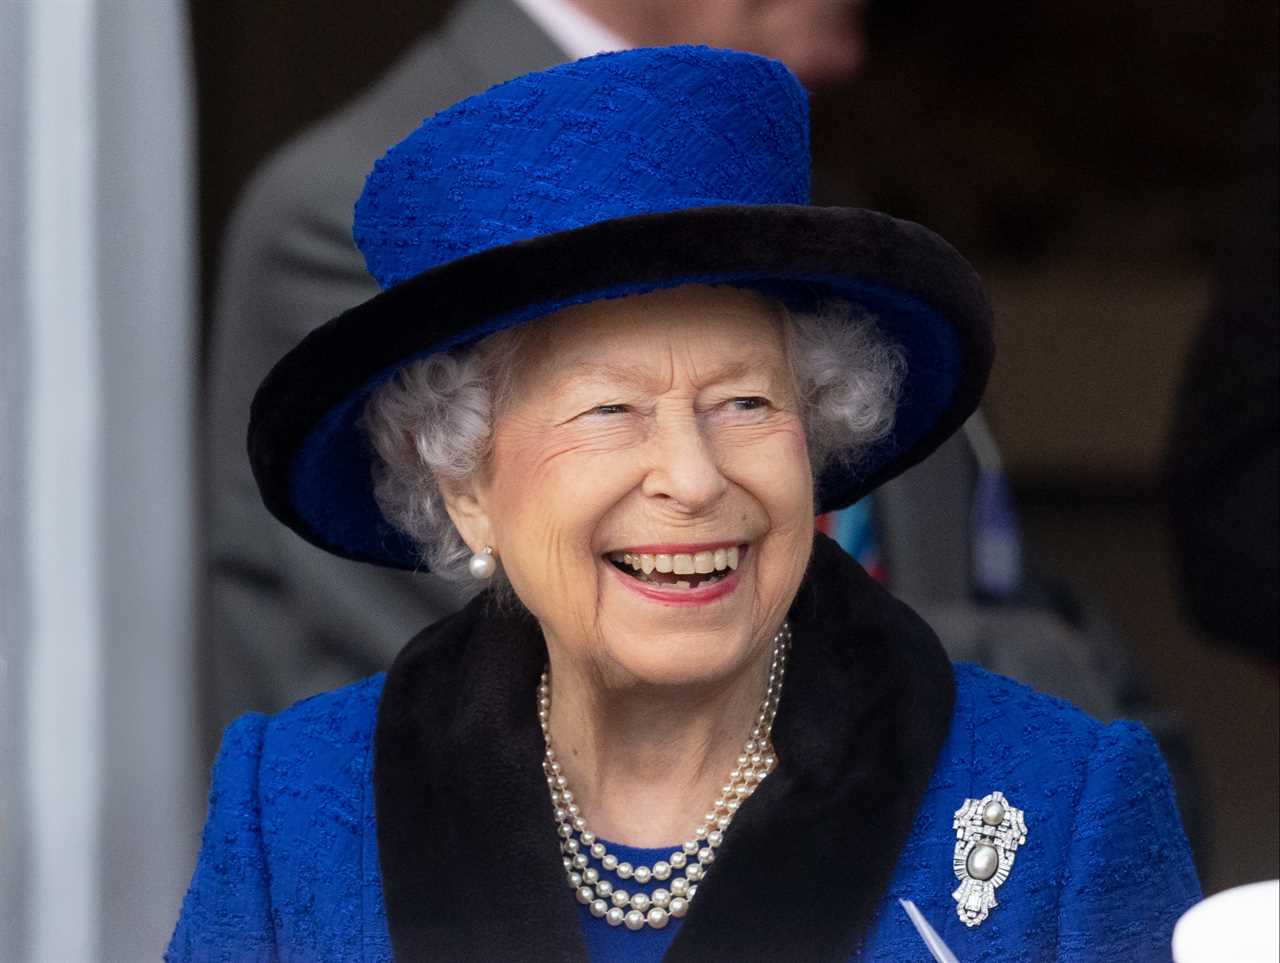 The Queen is said to be in good spirits following an overnight stay in hospital